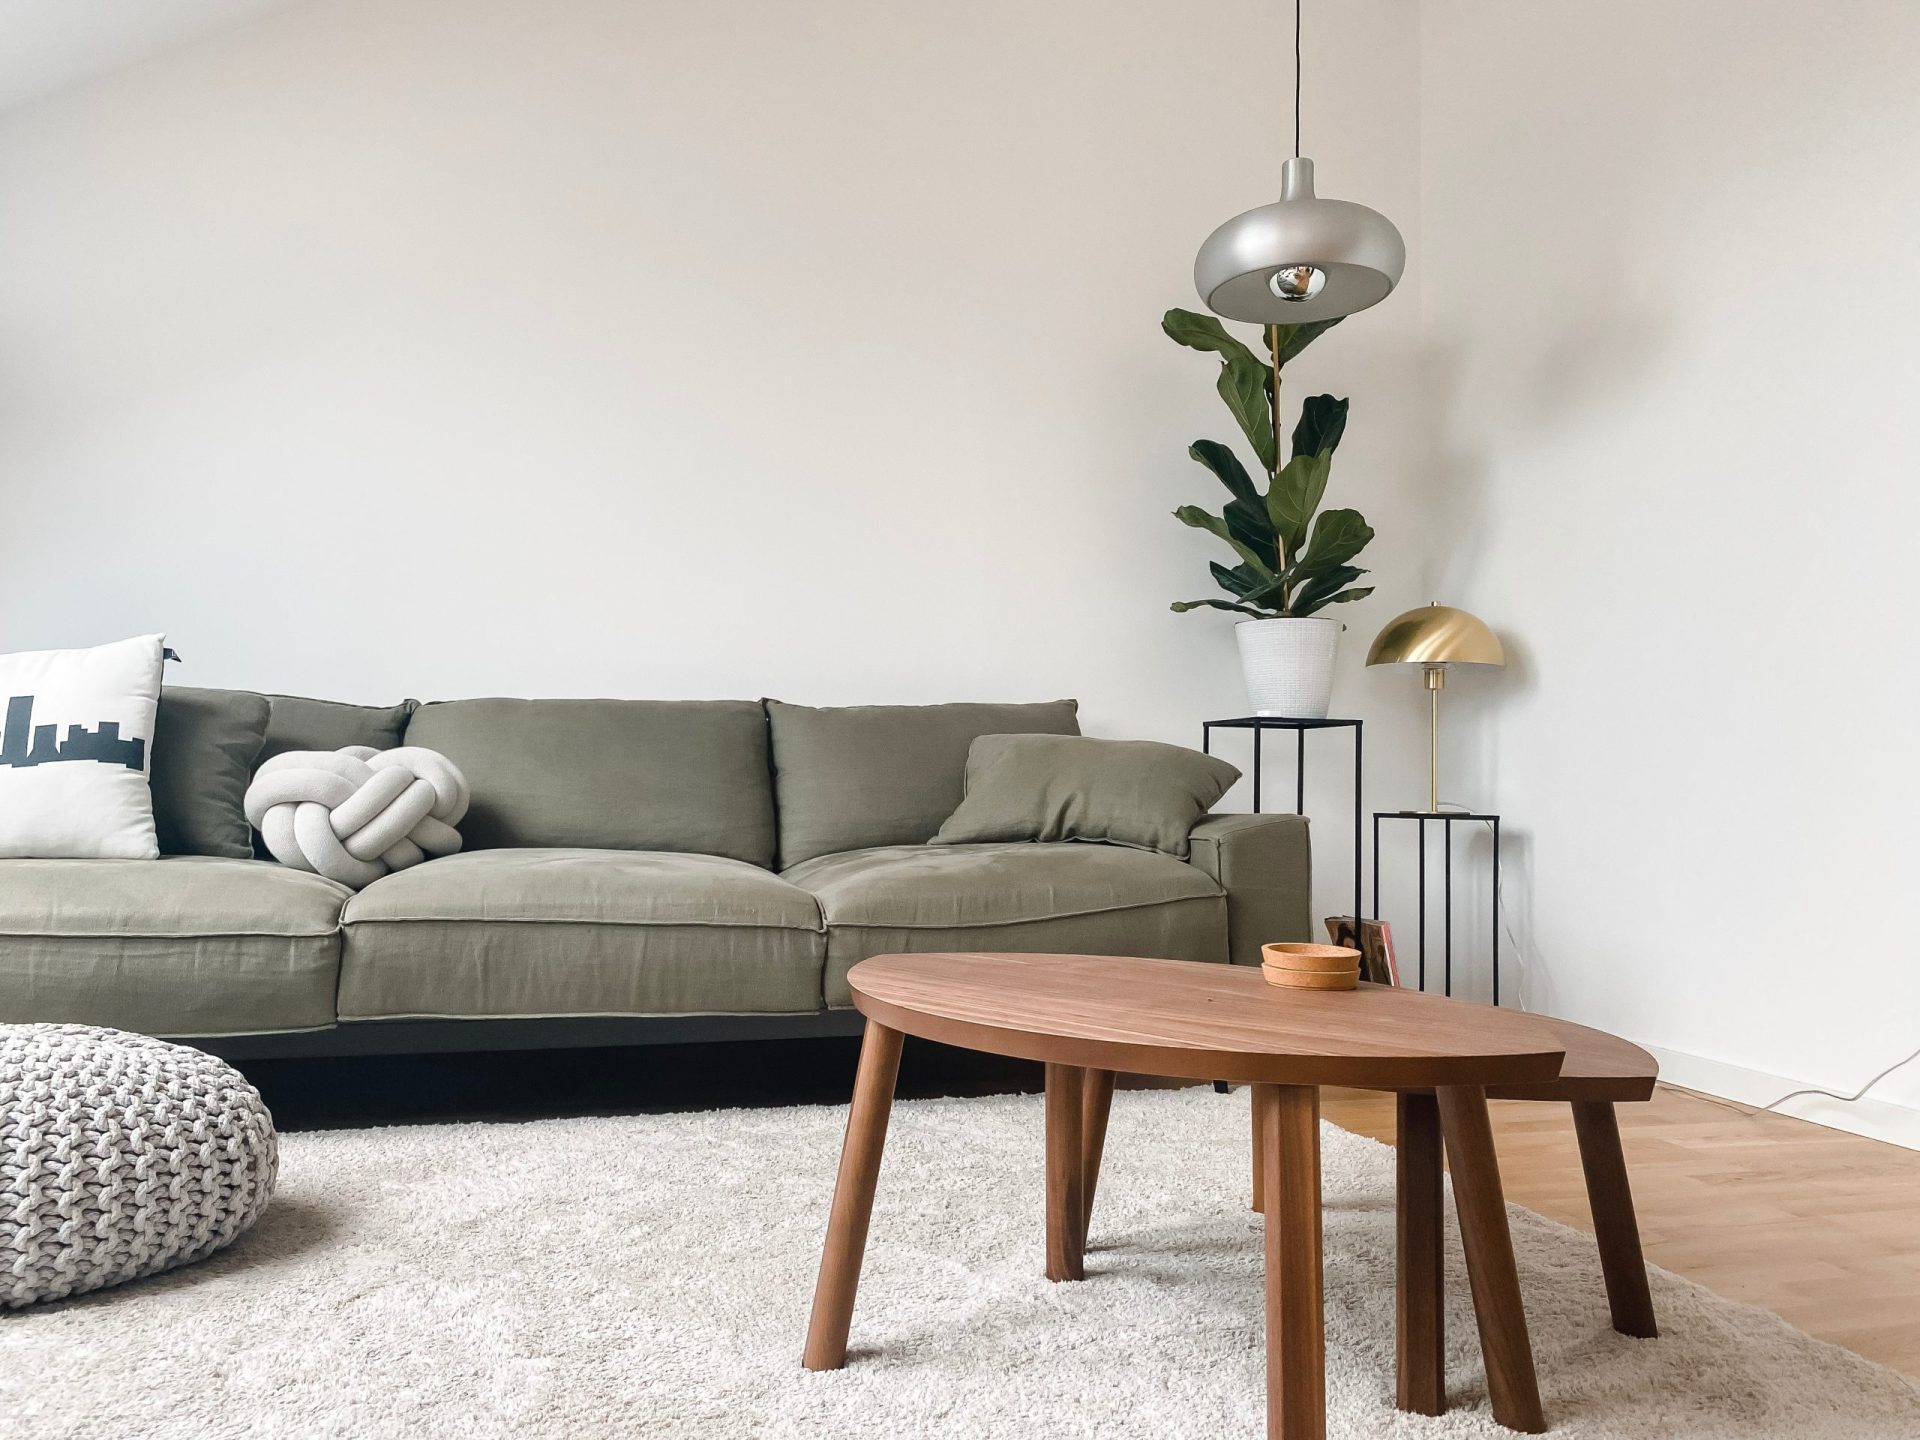 A living room with an olive green couch and a wooden coffee table shows what a minimalist home interior looks like.)